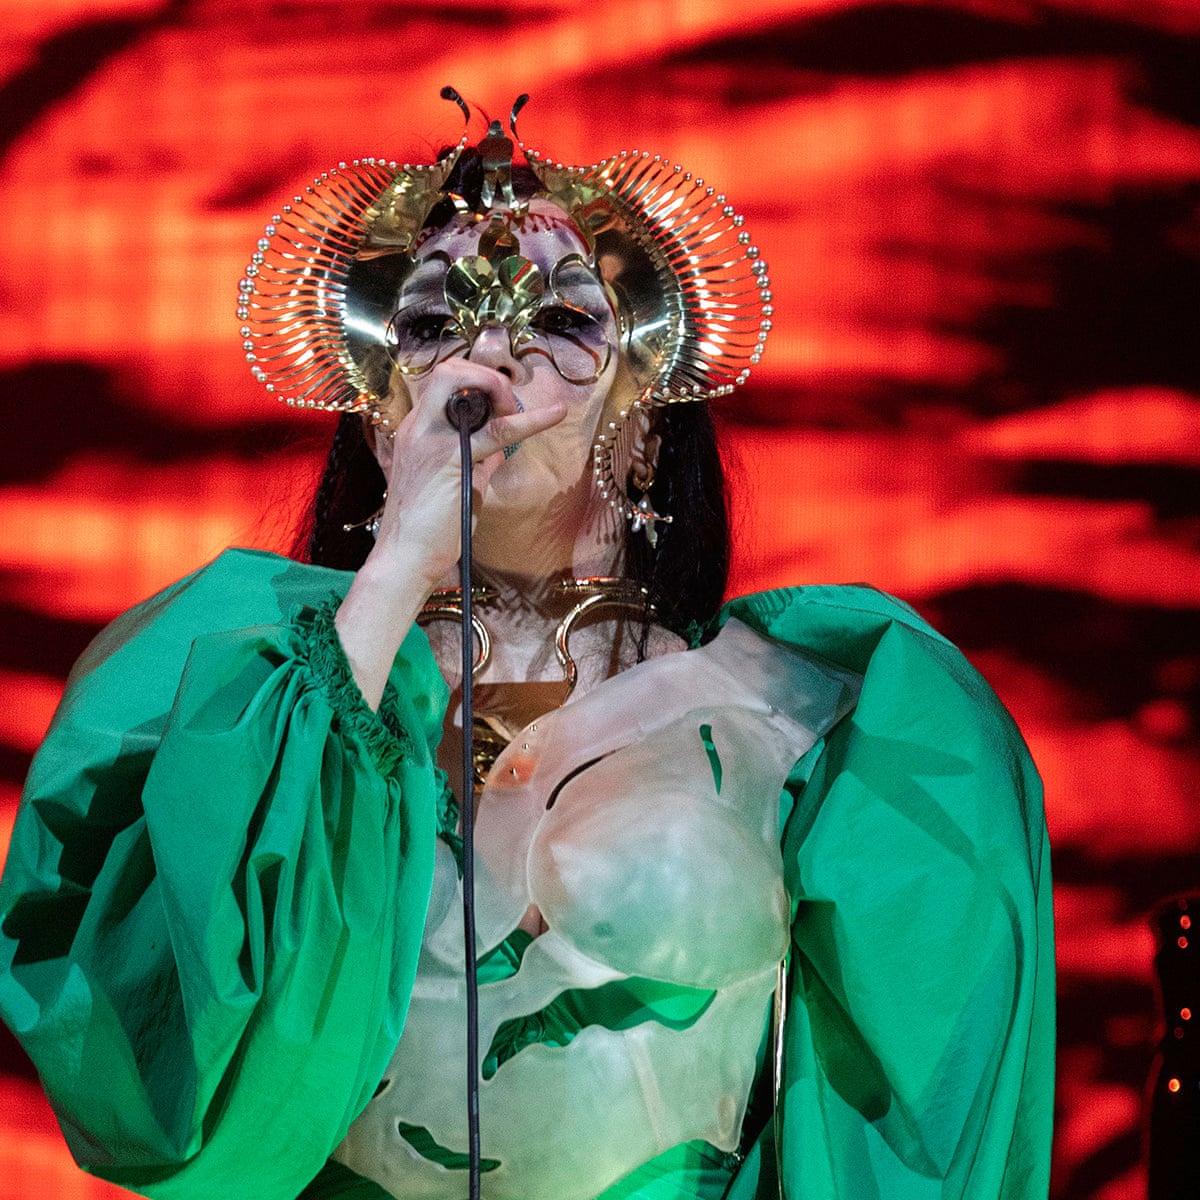 Björk Cornucopia review – an electrifying pop concert, art and opening ceremony rolled | Björk | The Guardian